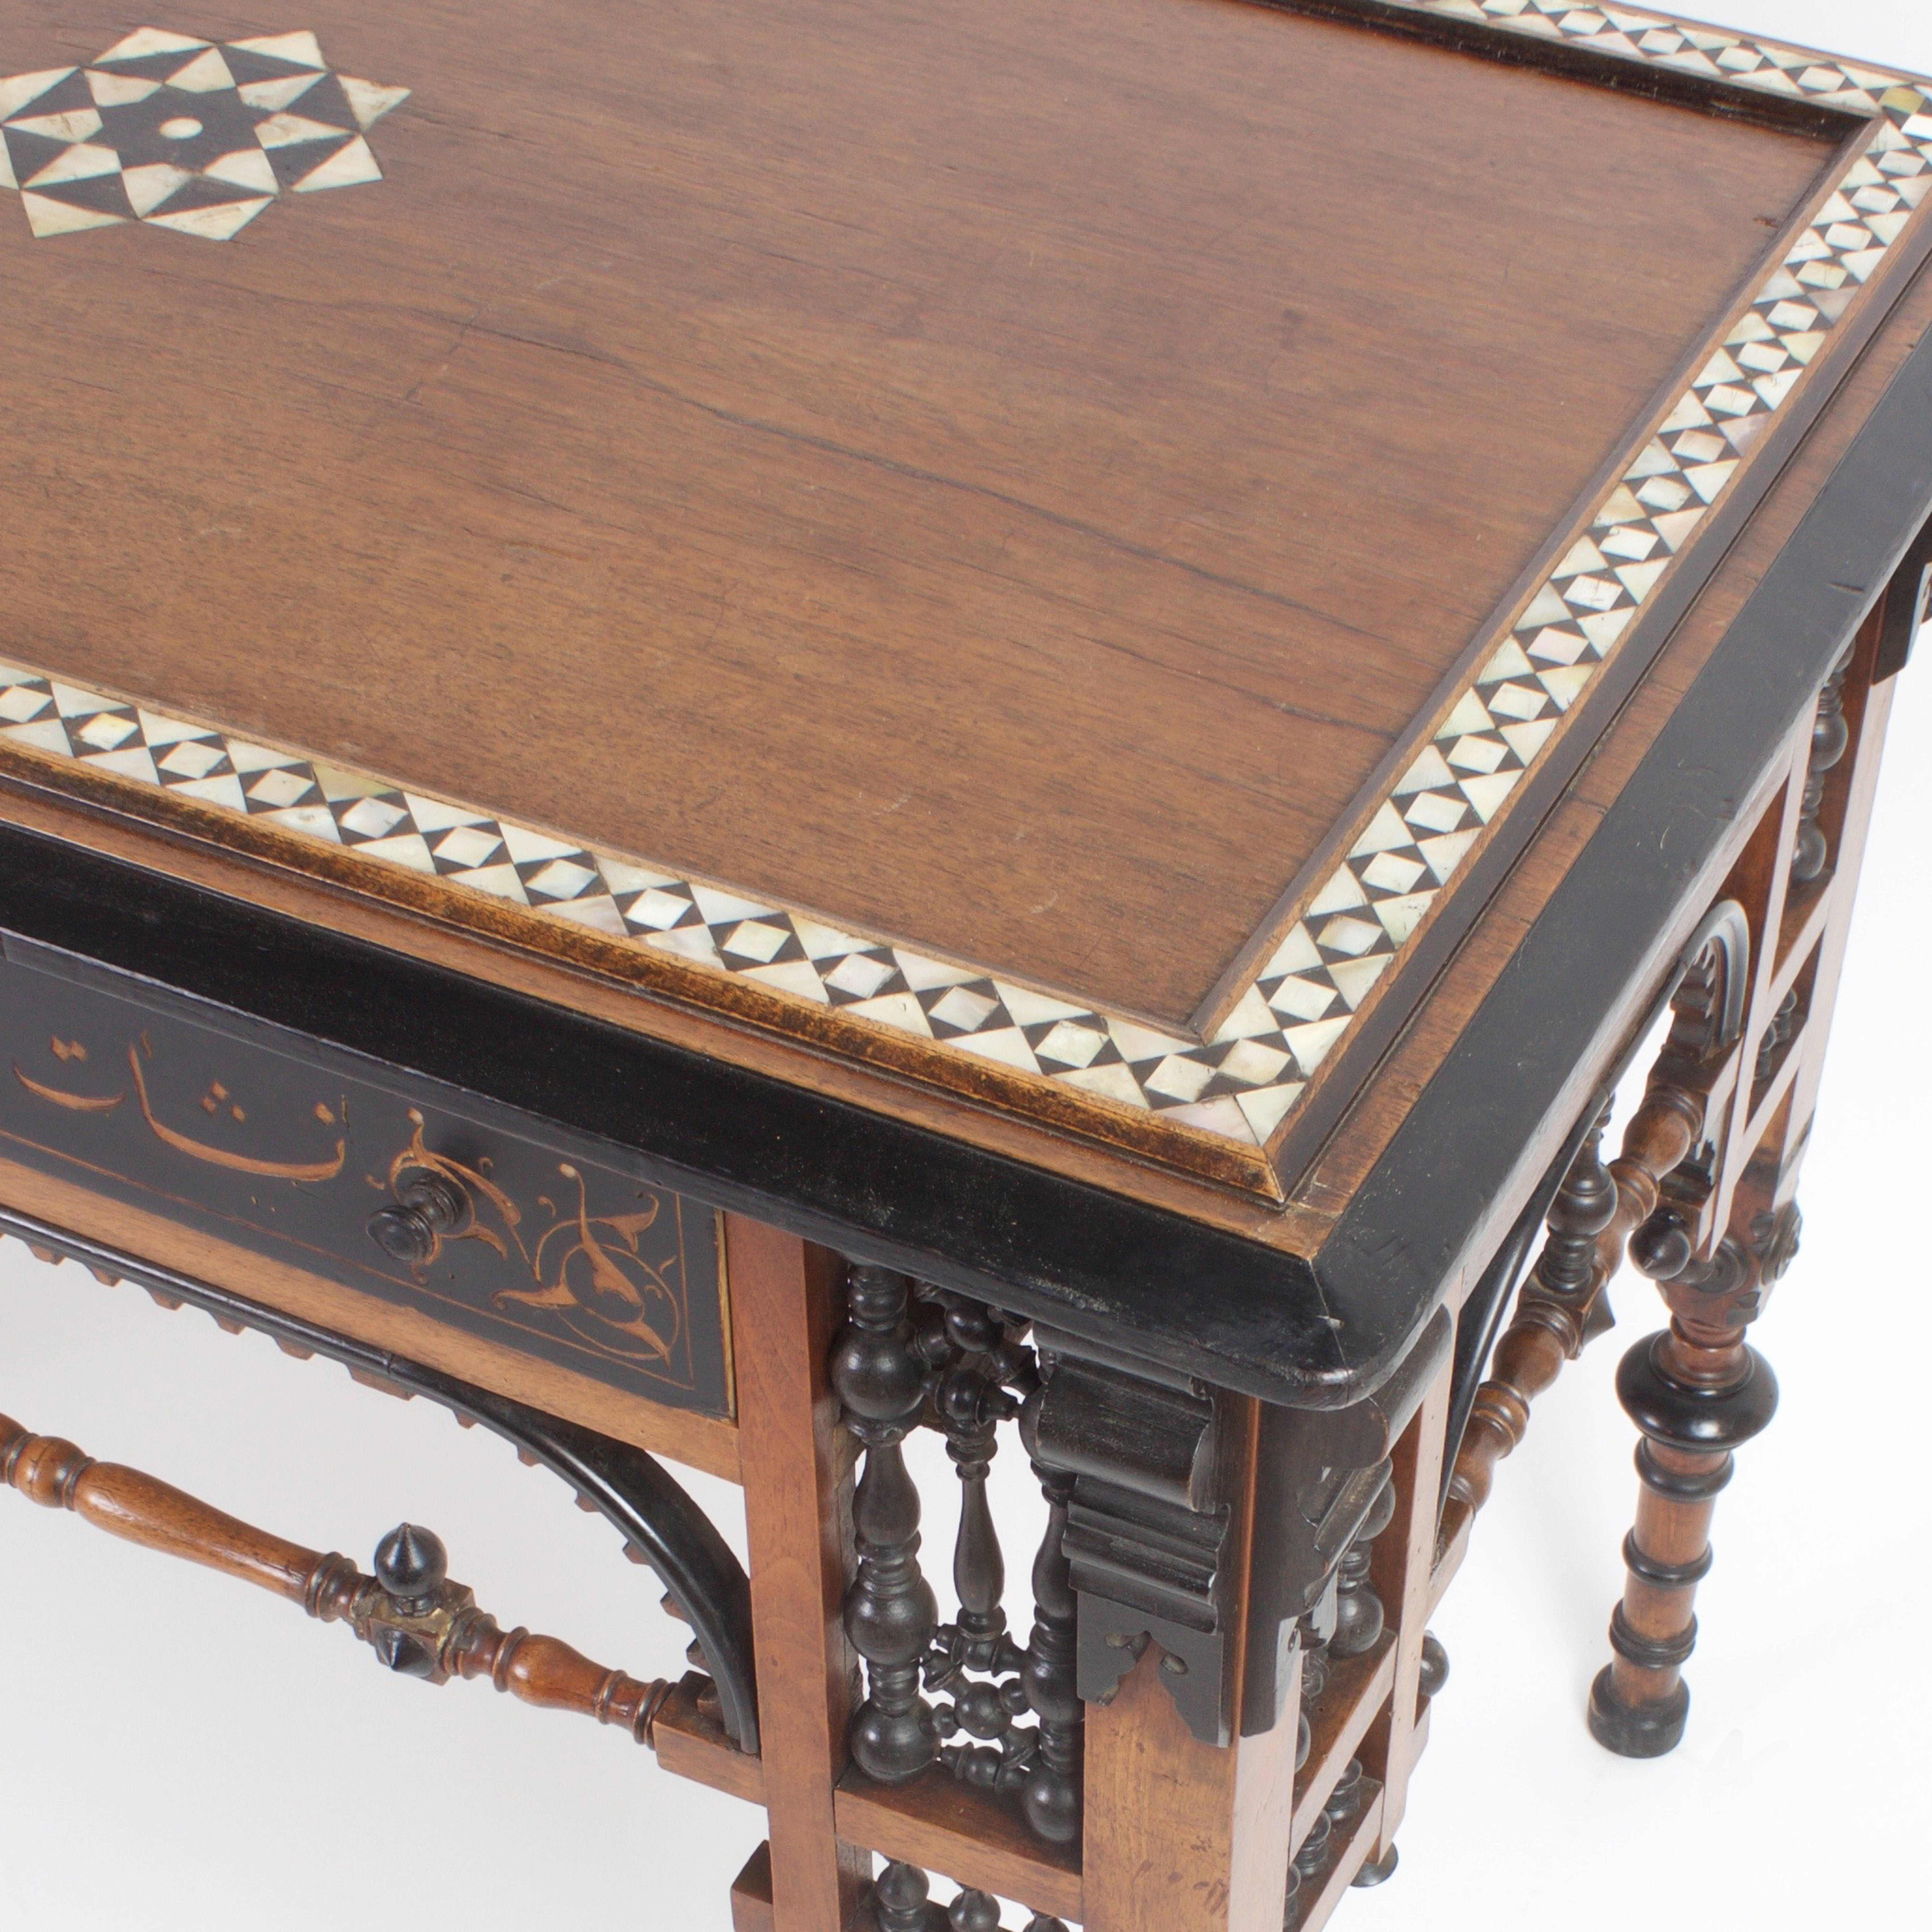 19th Century Exotic Aesthetic Movement Writing Desk or Table 2